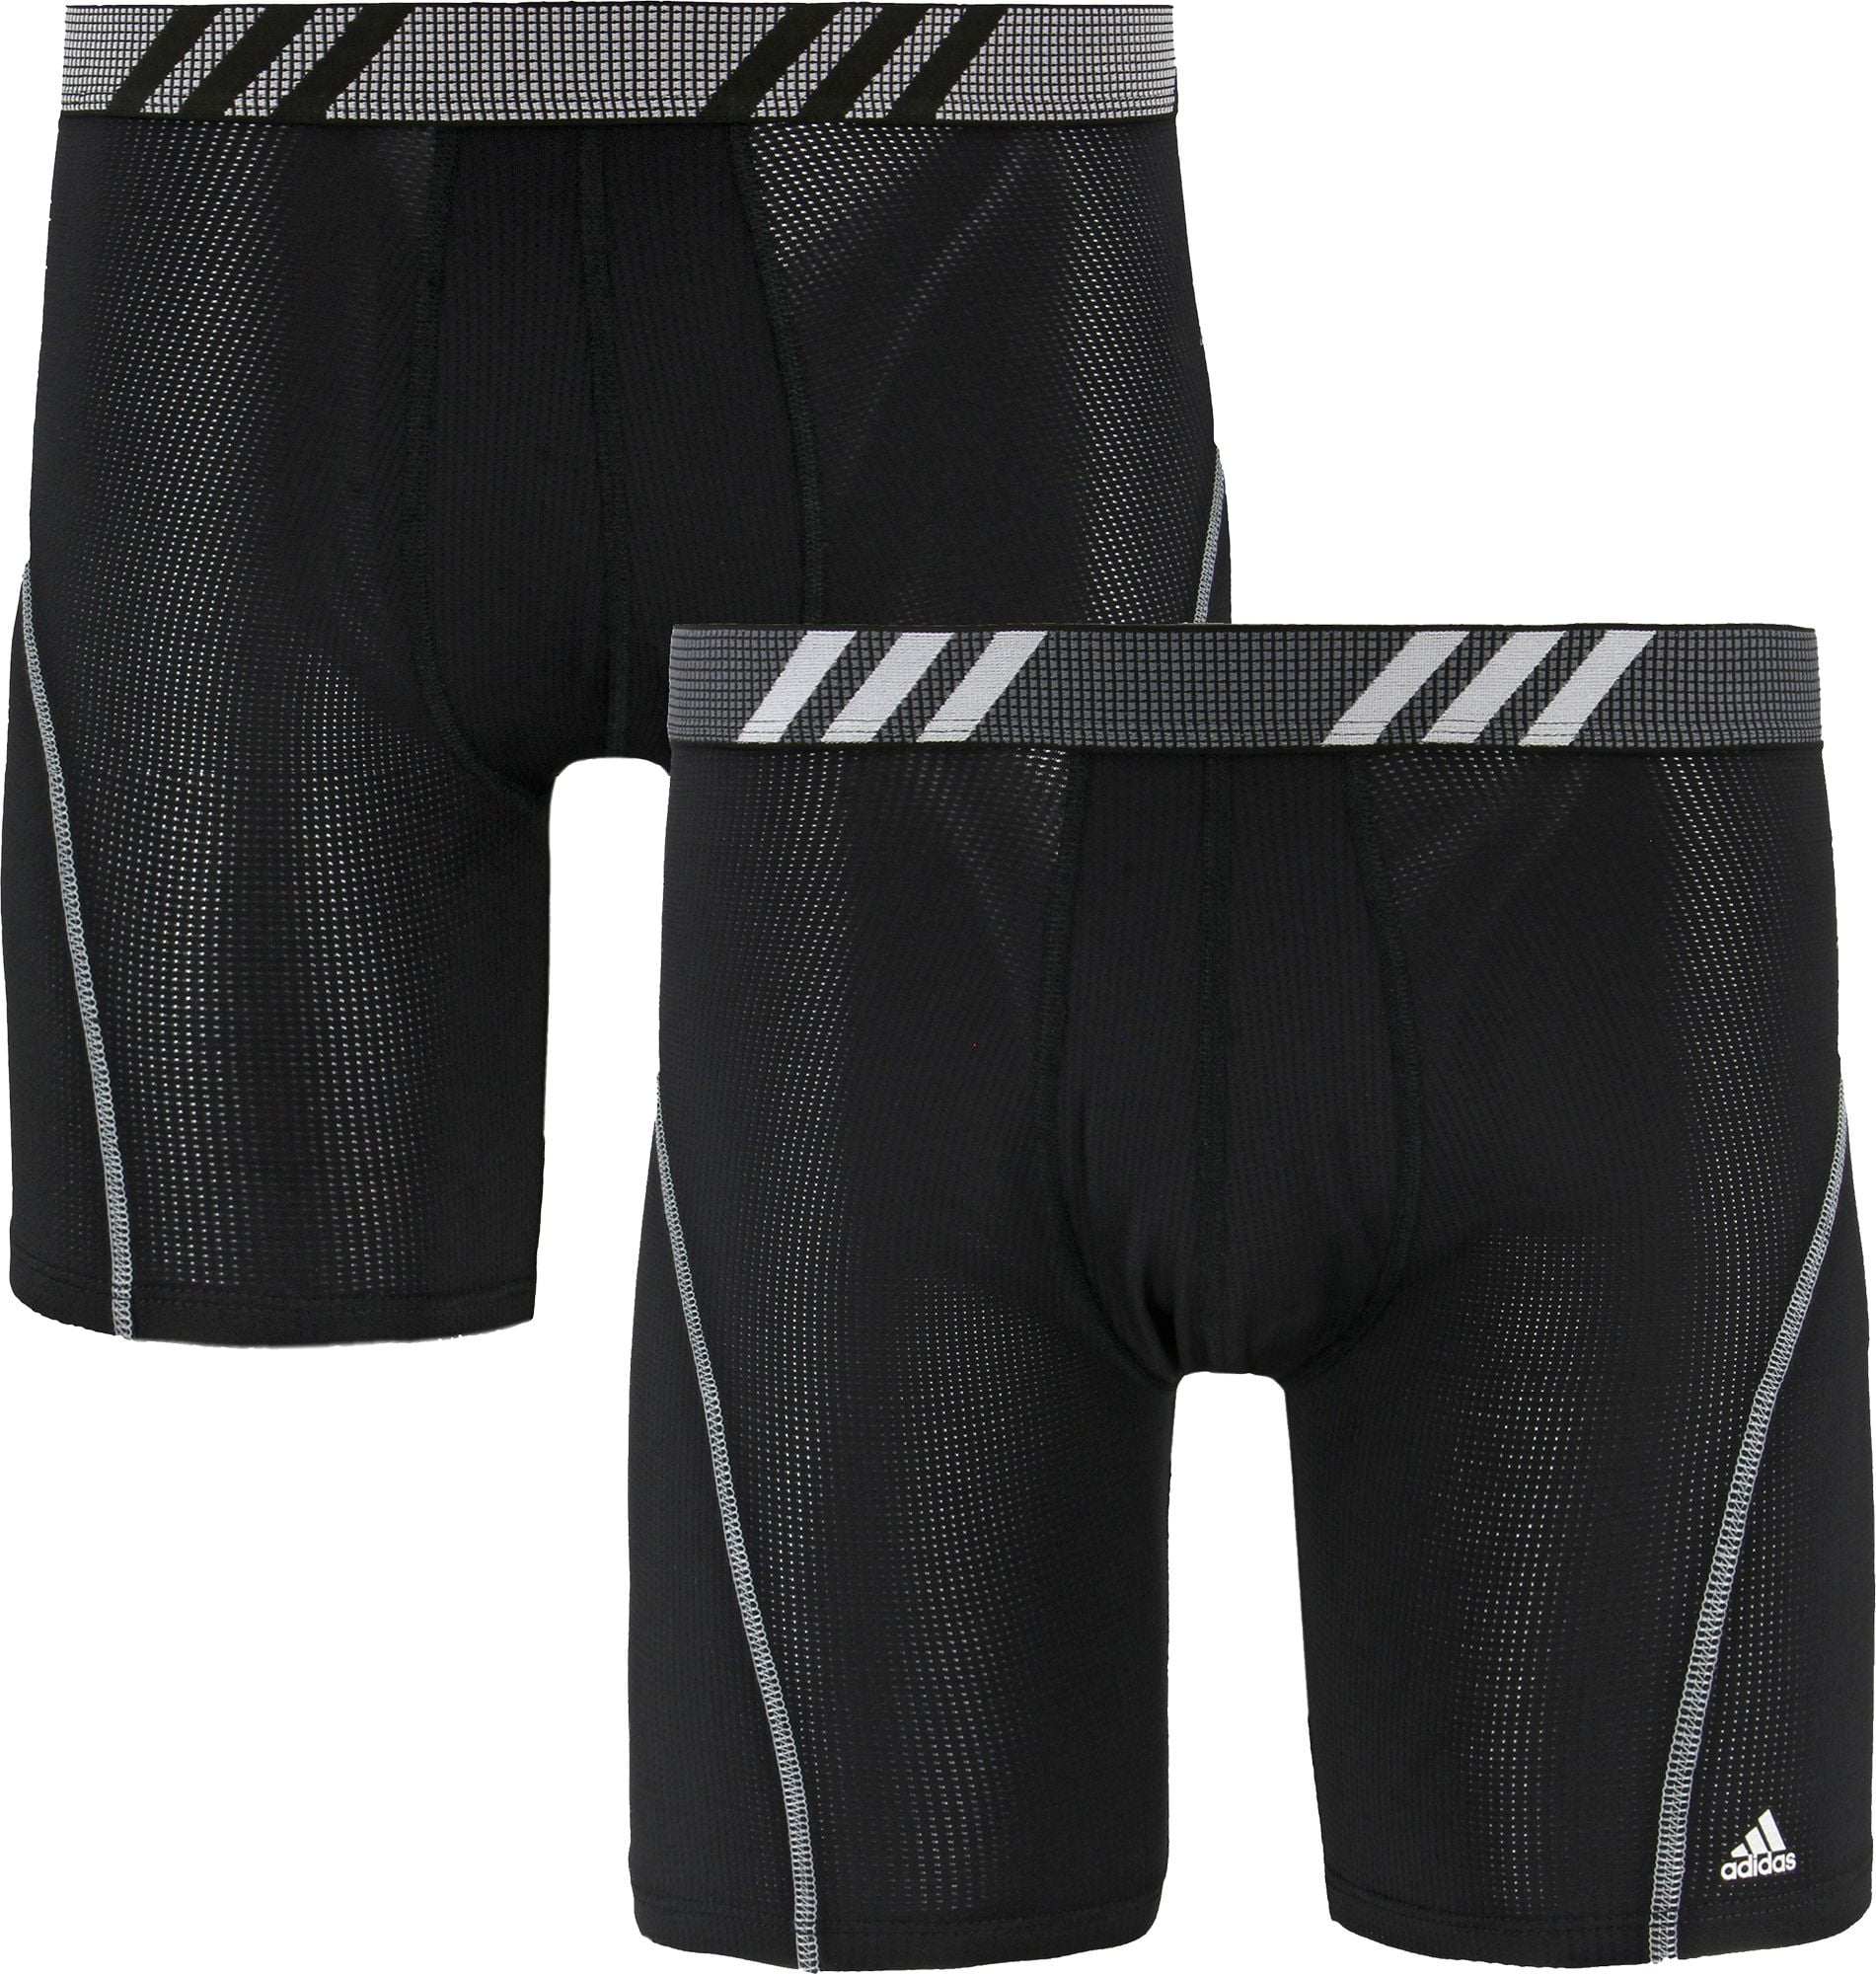 adidas men's climacool 7 midway briefs kit